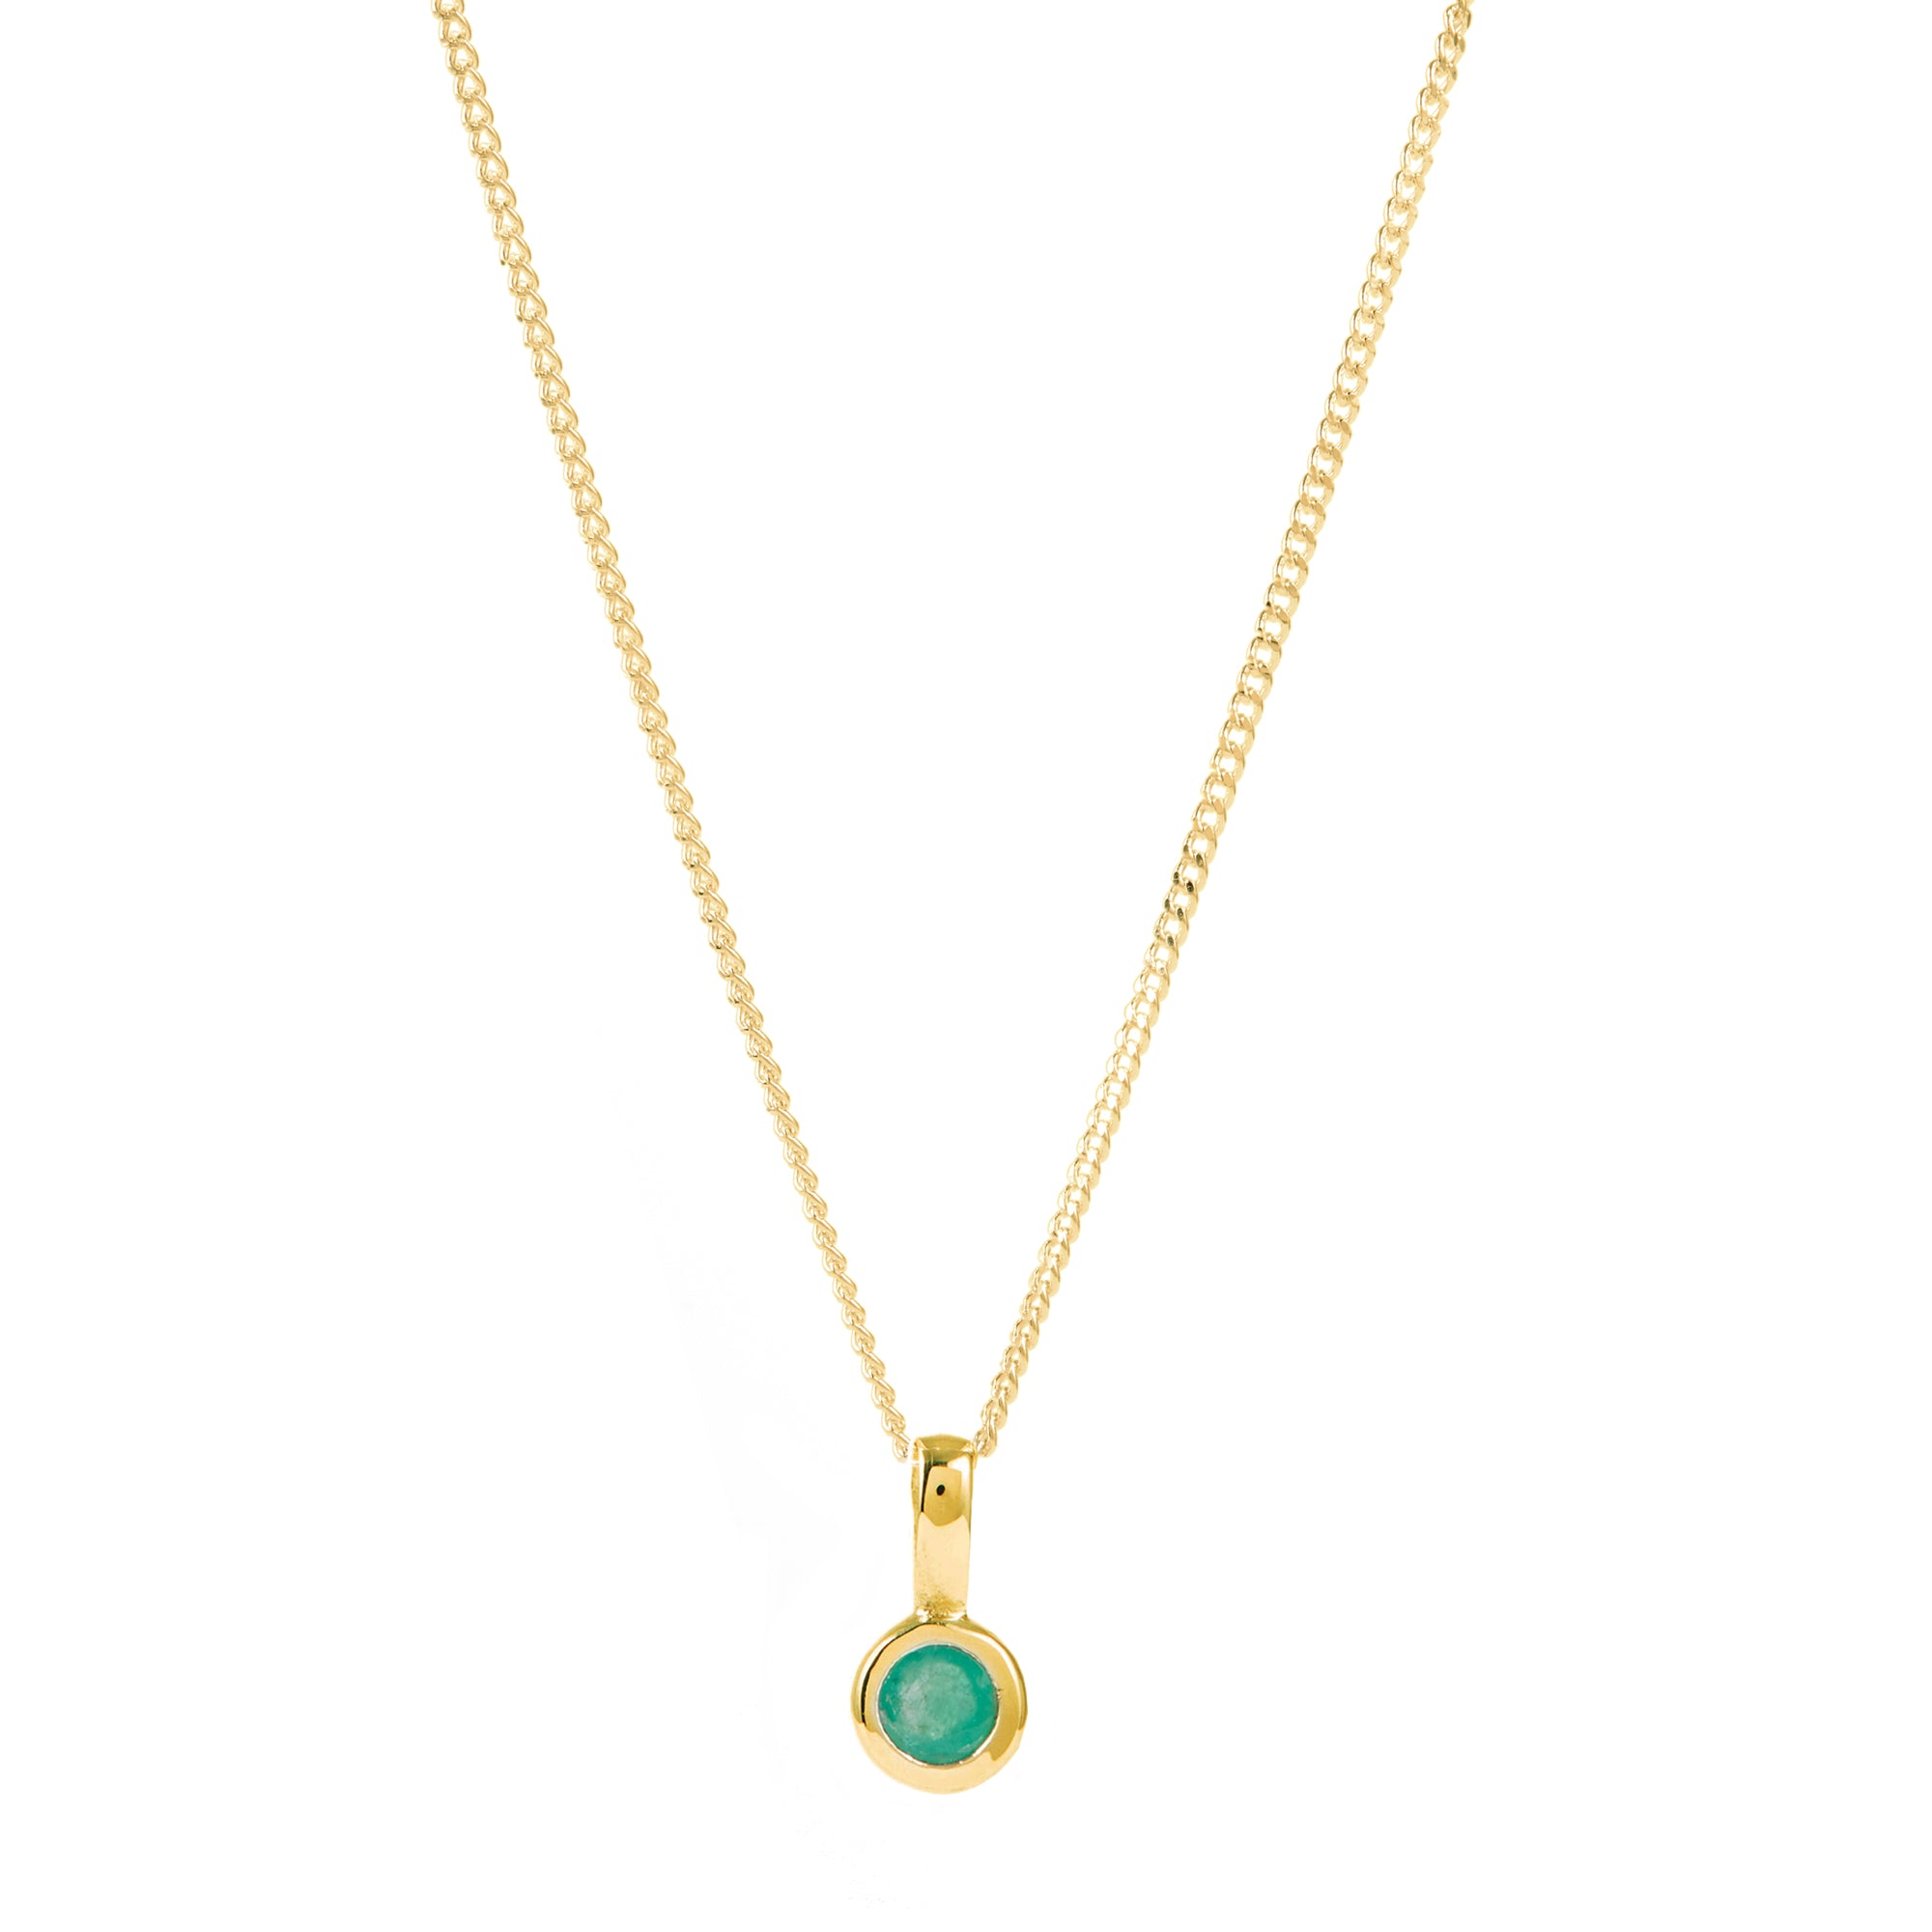 Emerald May Charm Necklace